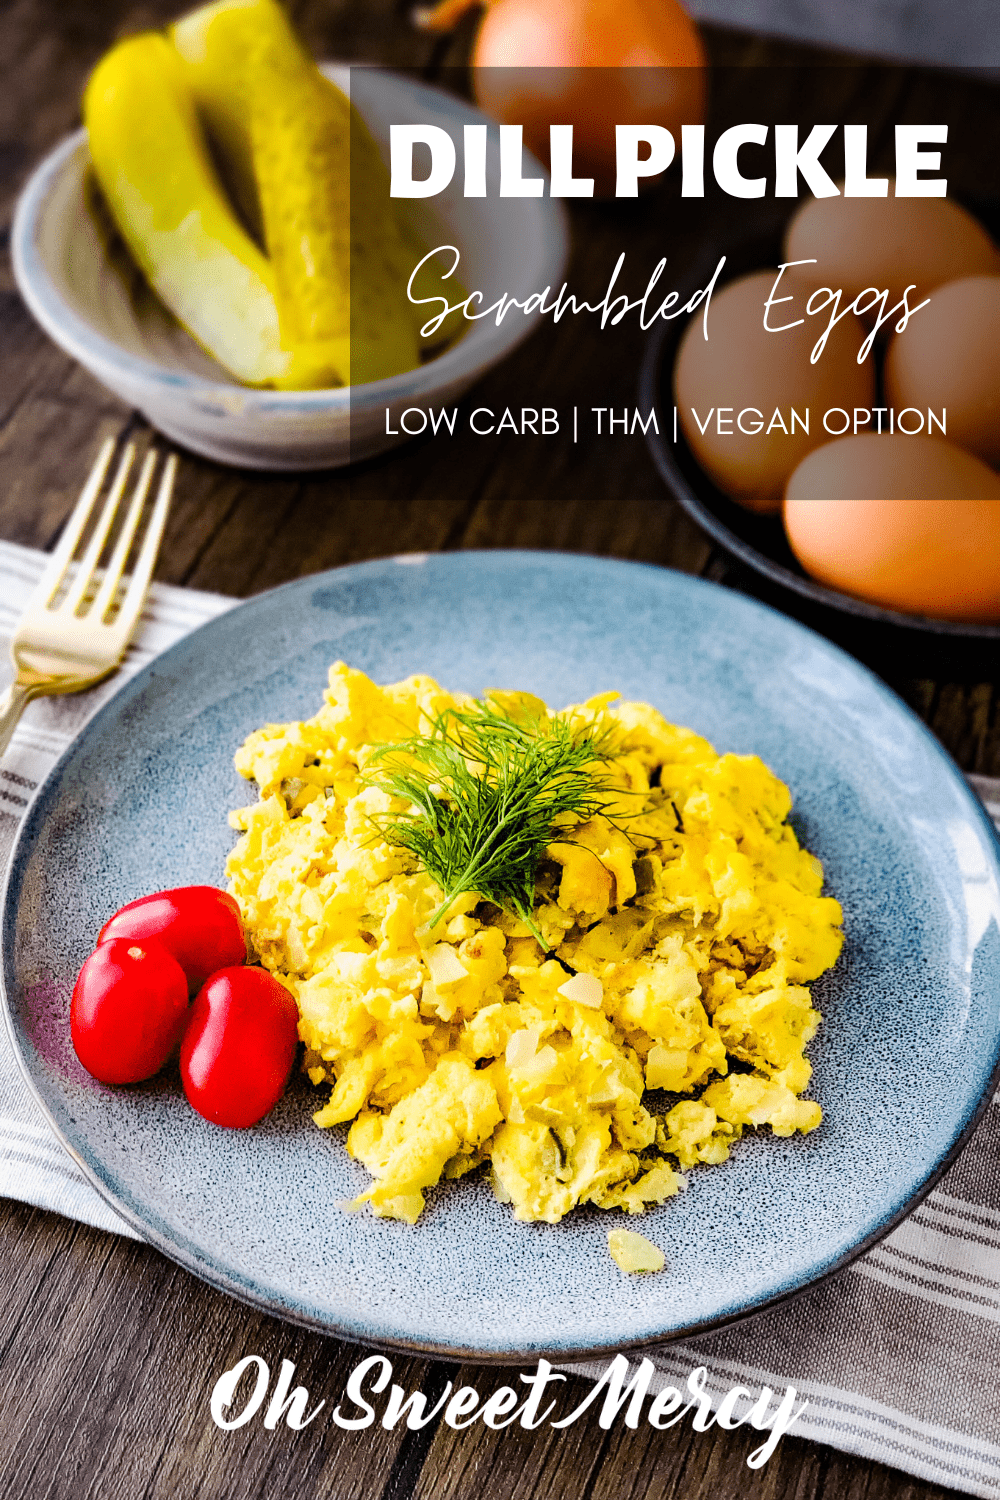  These Dill Pickle Scrambled Eggs are a quick and easy meal or snack! Use real eggs or liquid vegan egg substitute and just a few ingredients to quickly make a flavorful egg dish that wows your tastebuds! It sounds crazy but trust me, it's delicious! #thm #lowcarb #eggs #vegan #dairyfree #easybreakfast